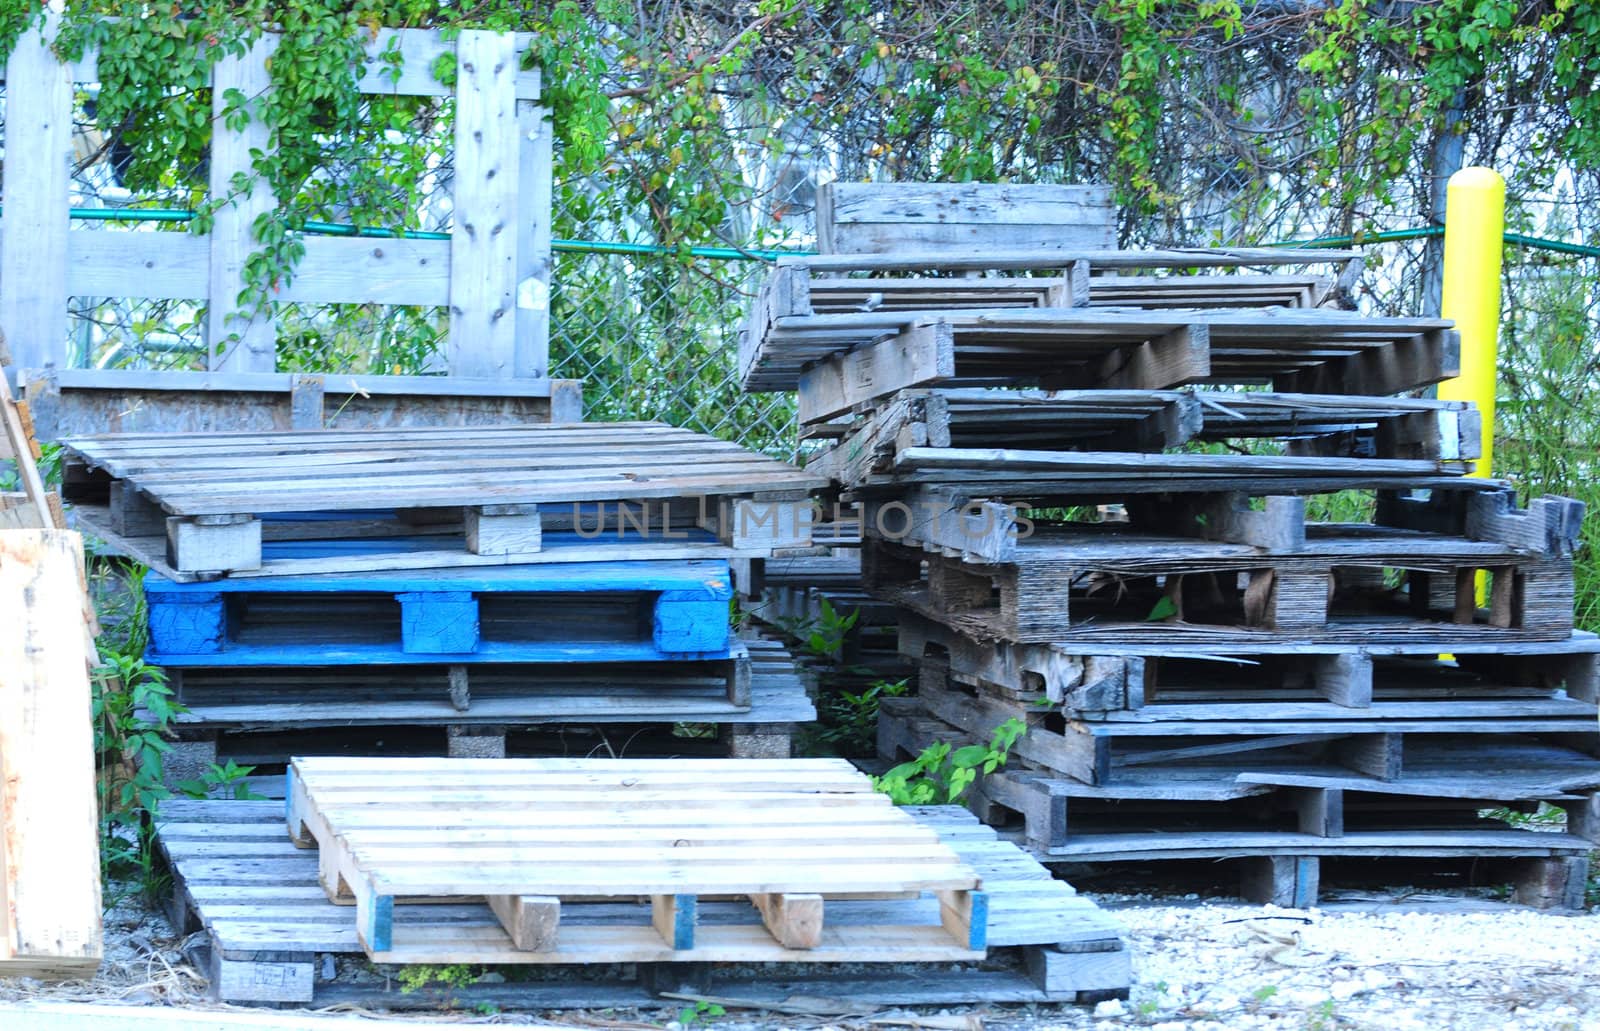 shipping pallets by ftlaudgirl